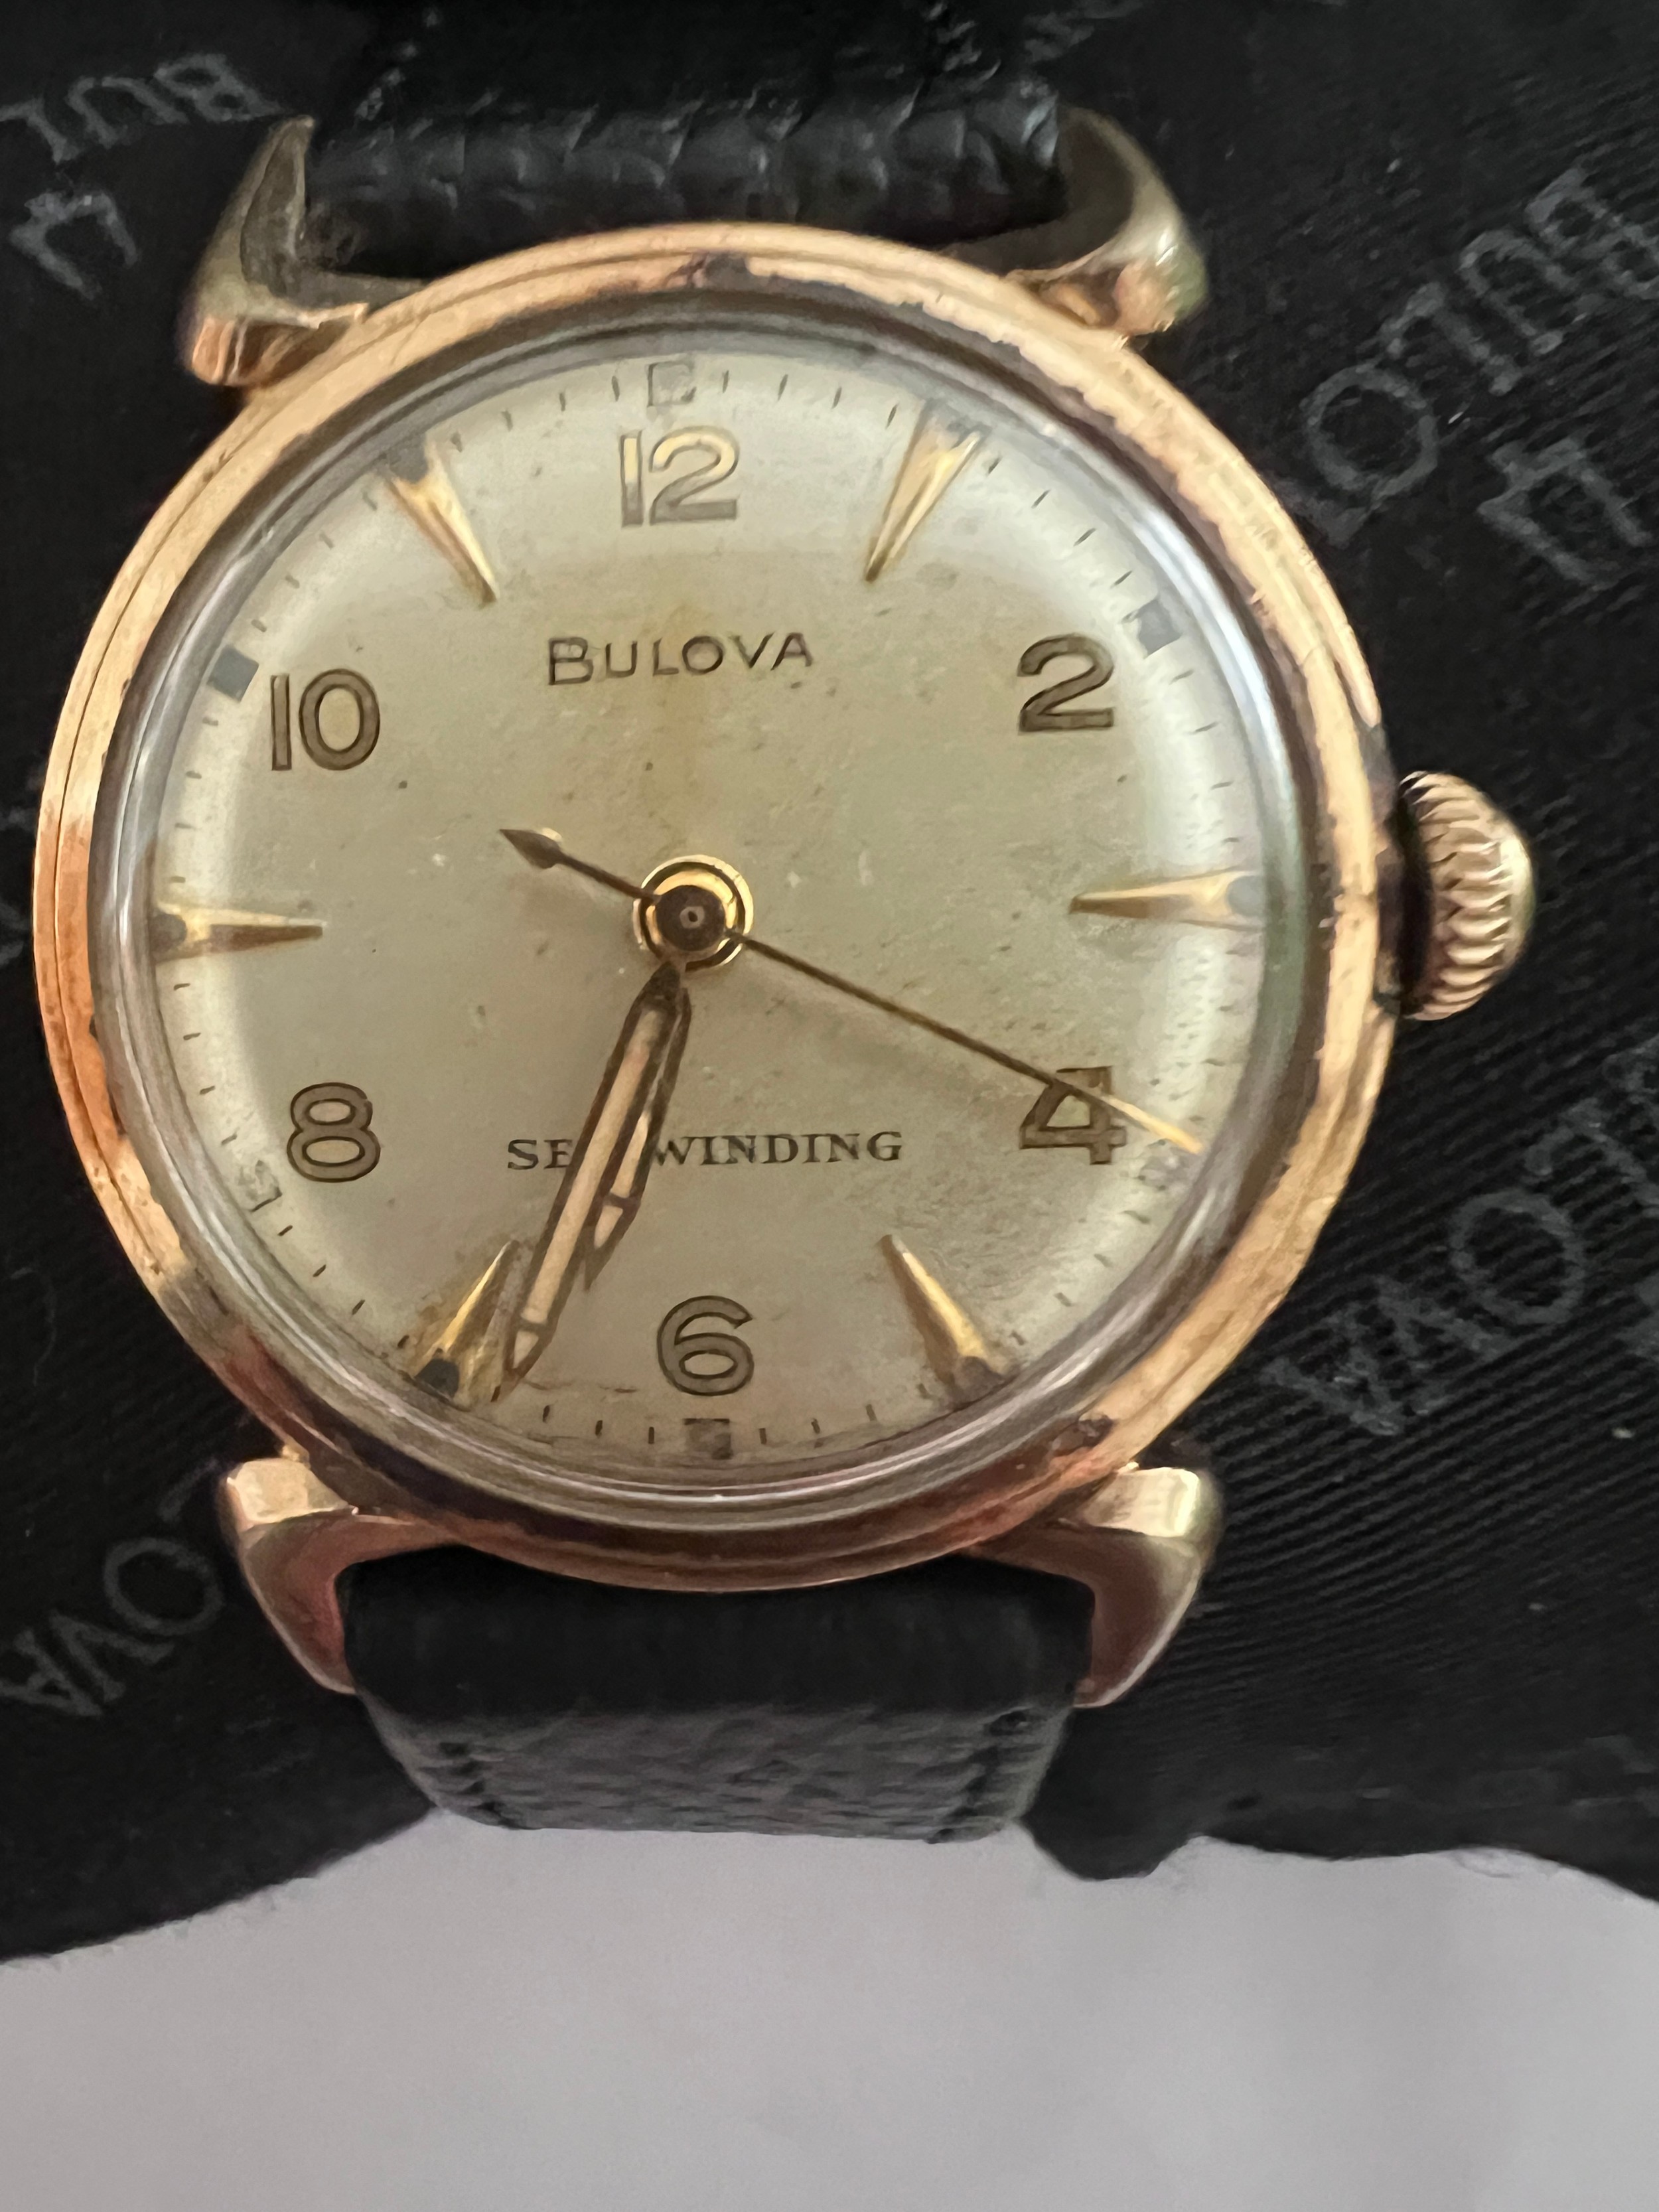 A 1950's Bulova Self Winding gold plated and stainless steel gentleman's wristwatch. With Bulova